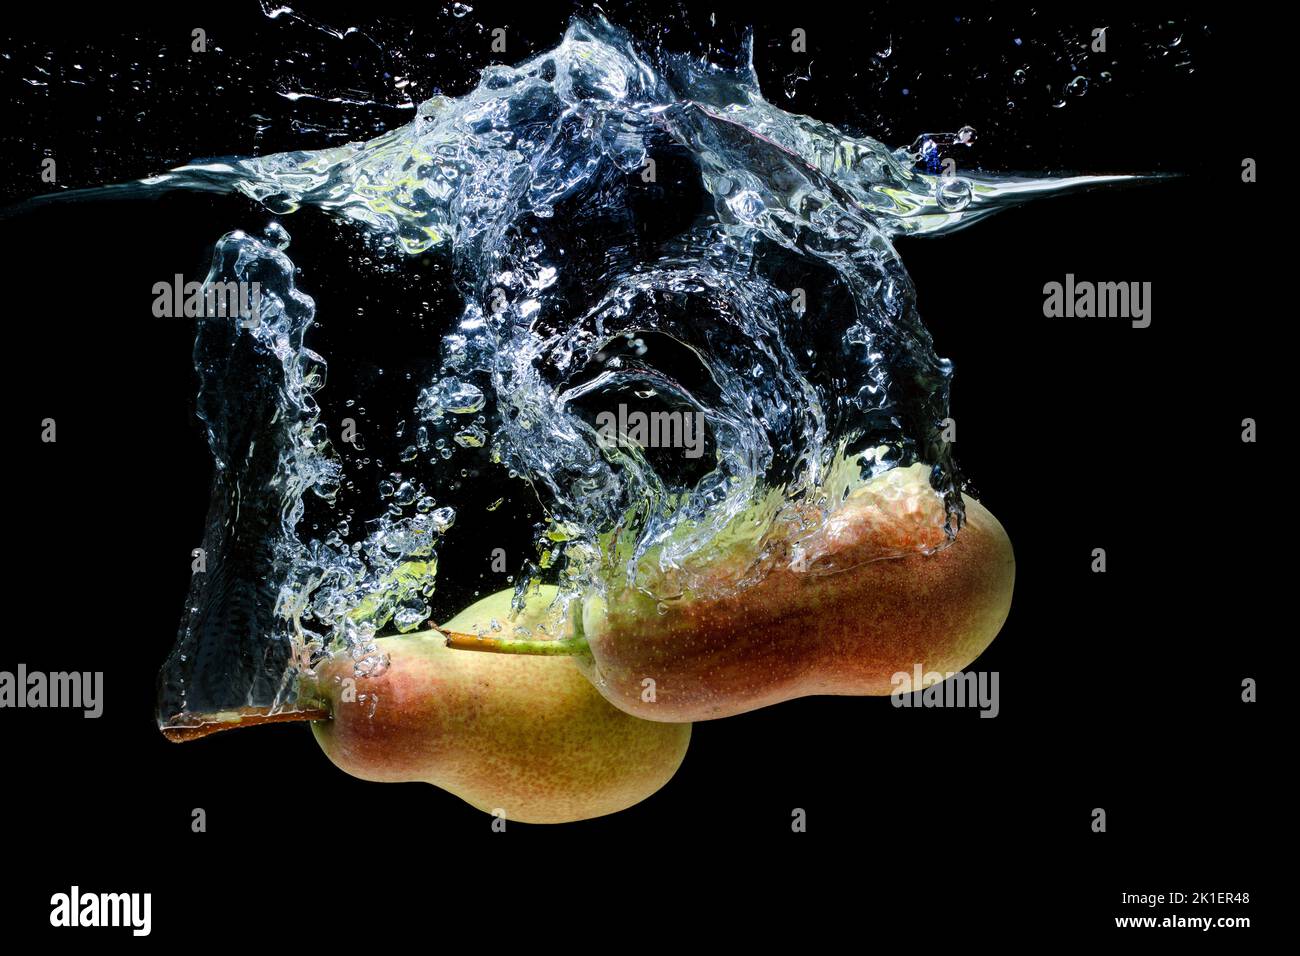 Close-up of two ripe whole pears dropped in water with splashes isolated on black background. Stock Photo